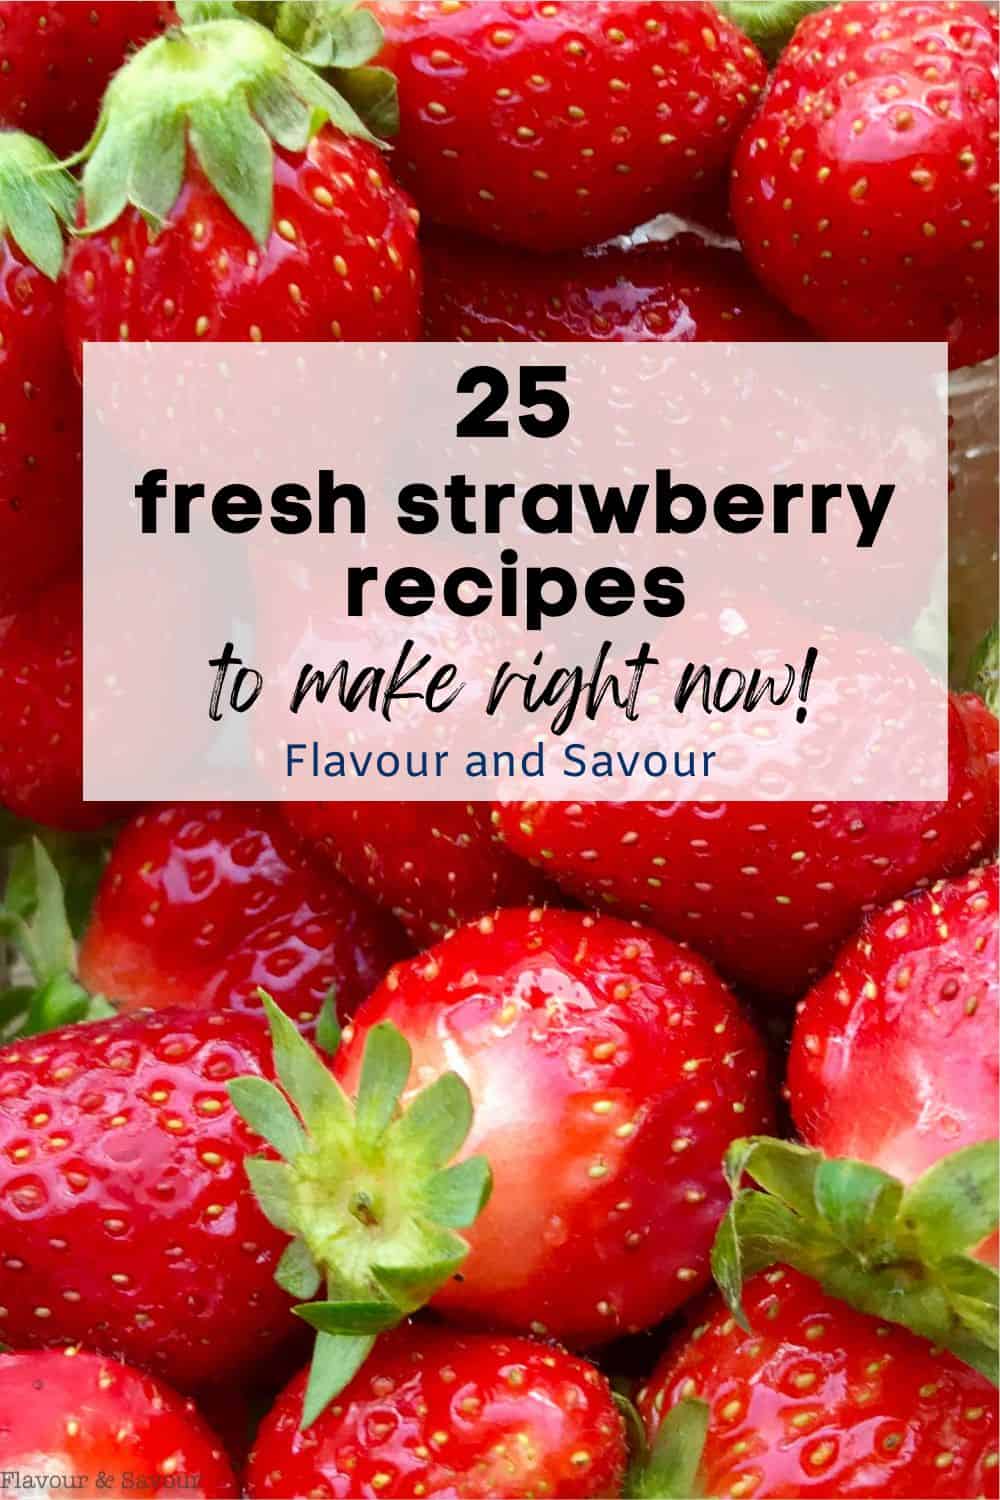 25 fresh strawberry recipes to make right now.